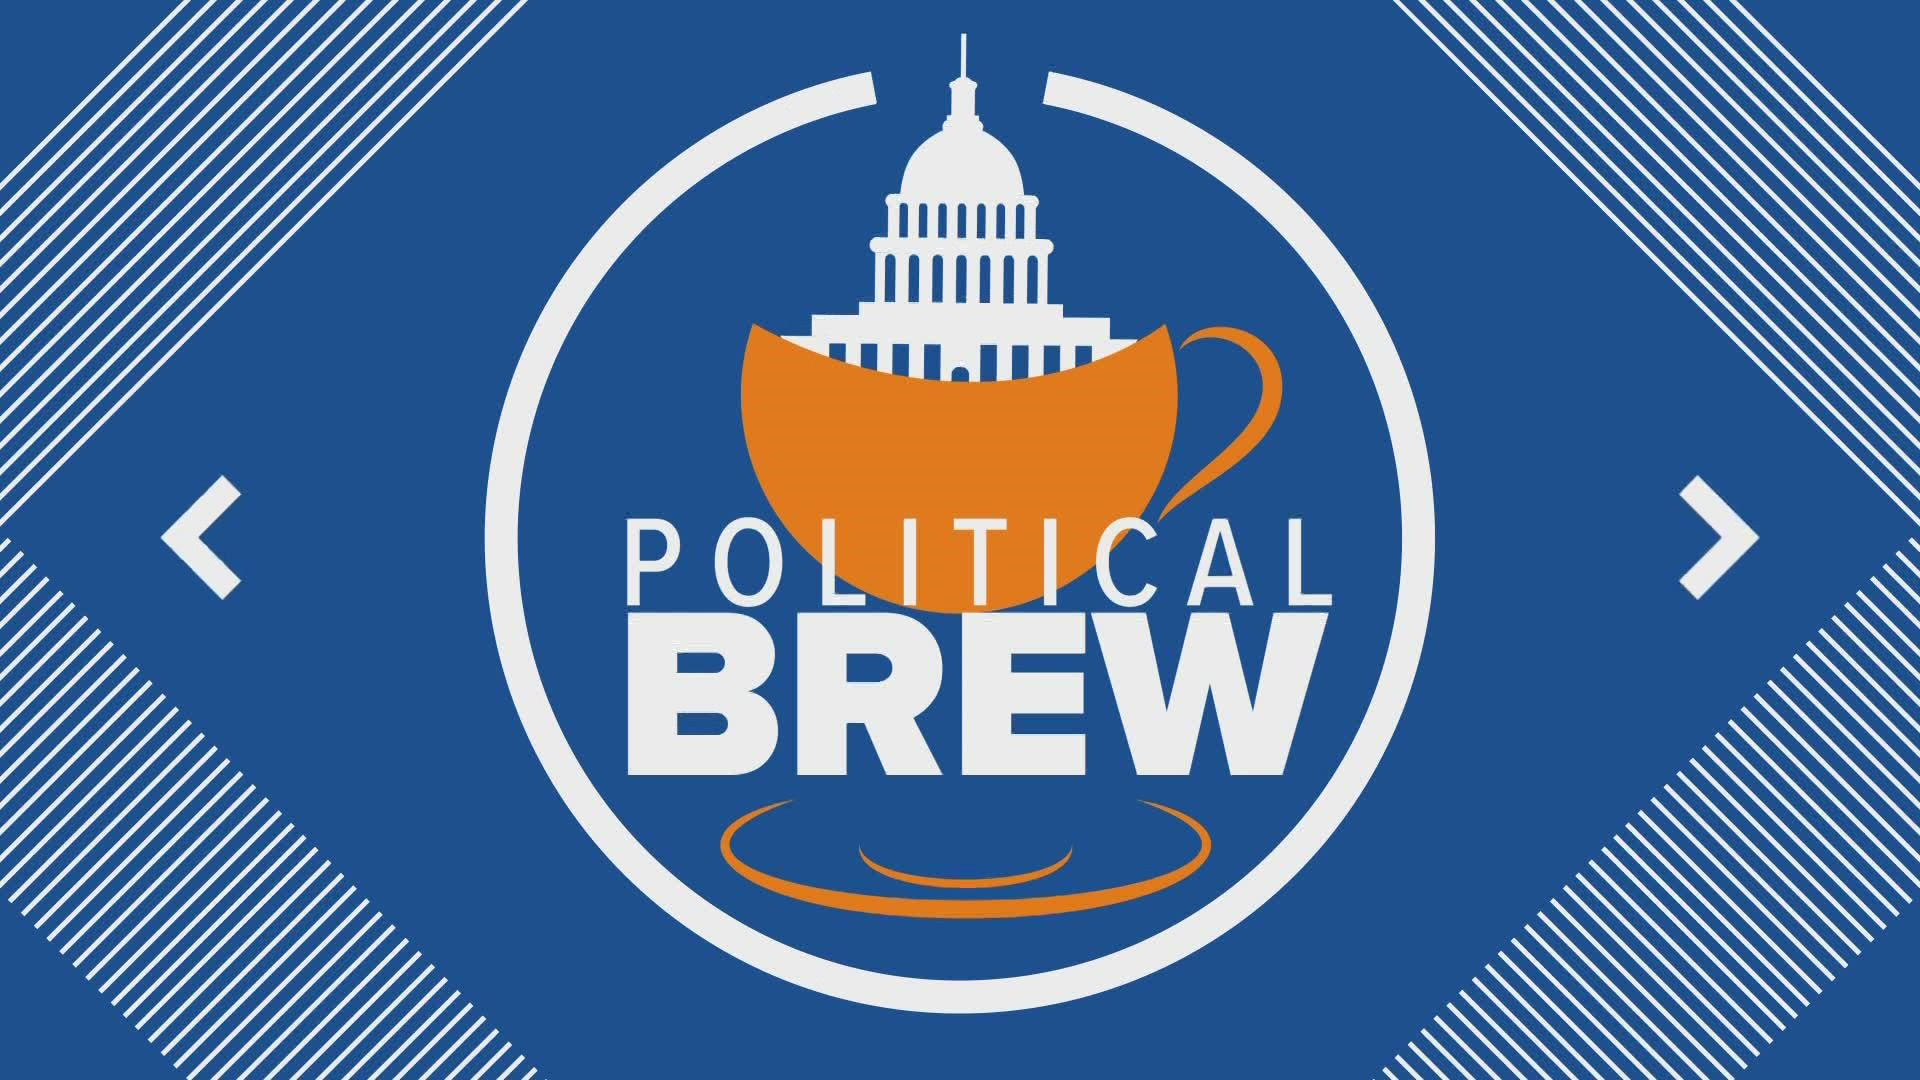 This week's analysts are Democratic activist Betsy Sweet, former Yarmouth town councilor, and Republican state Sen. Phil Harriman.